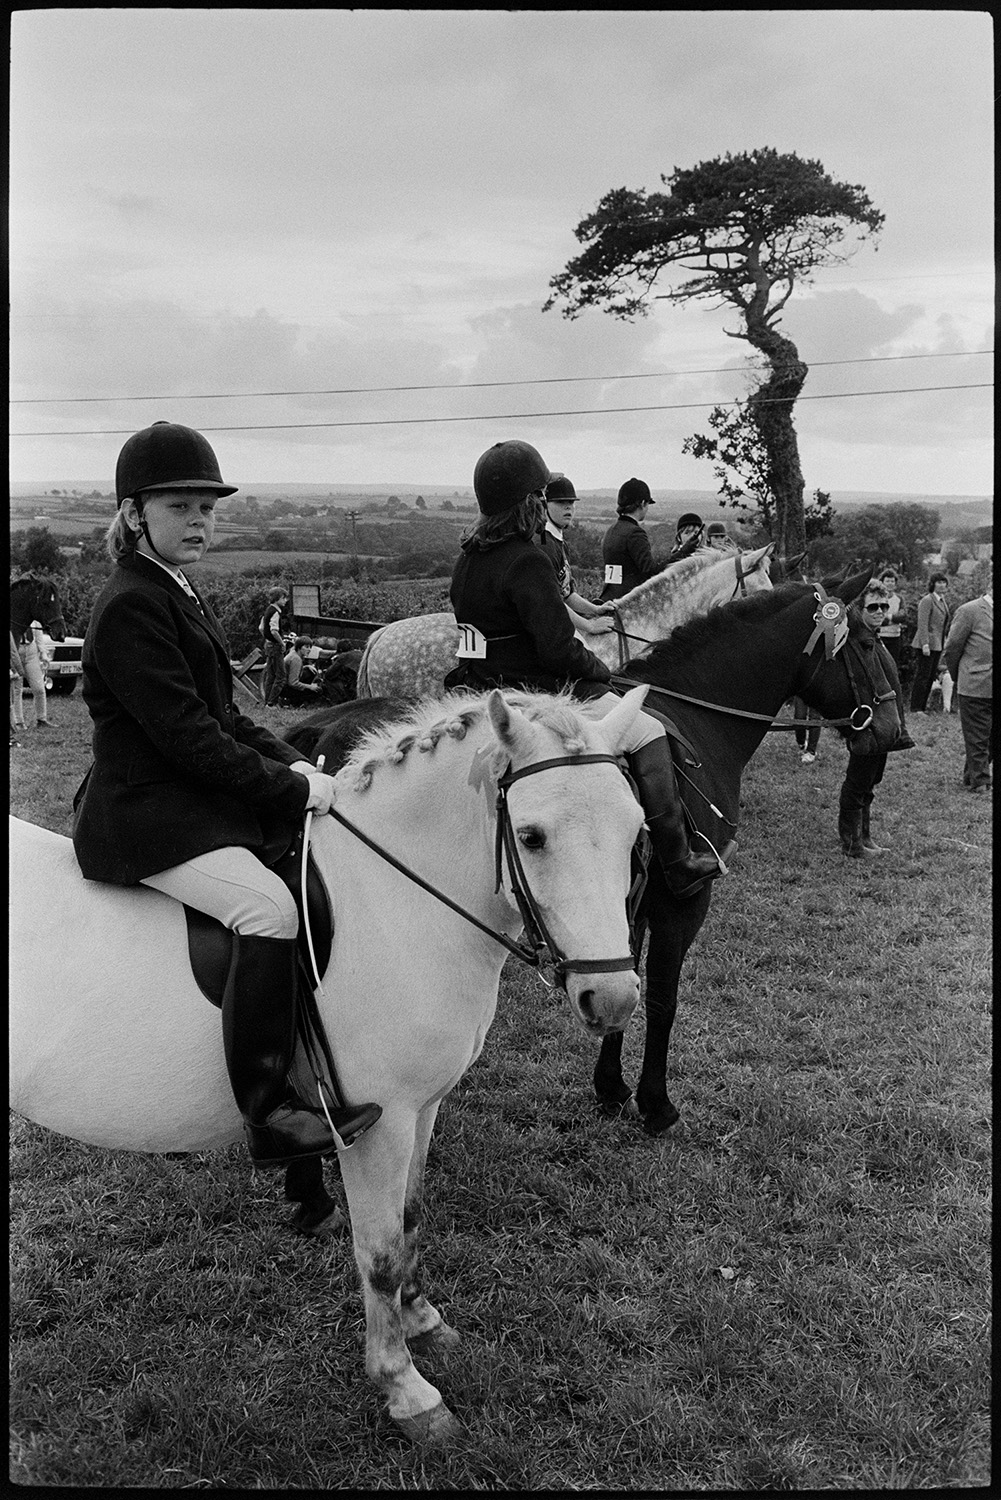 Horses and riders at gymkhana. Ponies.
[Young riders mounted on horses in a line in a field at Dolton Gymkhana. A tree can be seen in the background.]